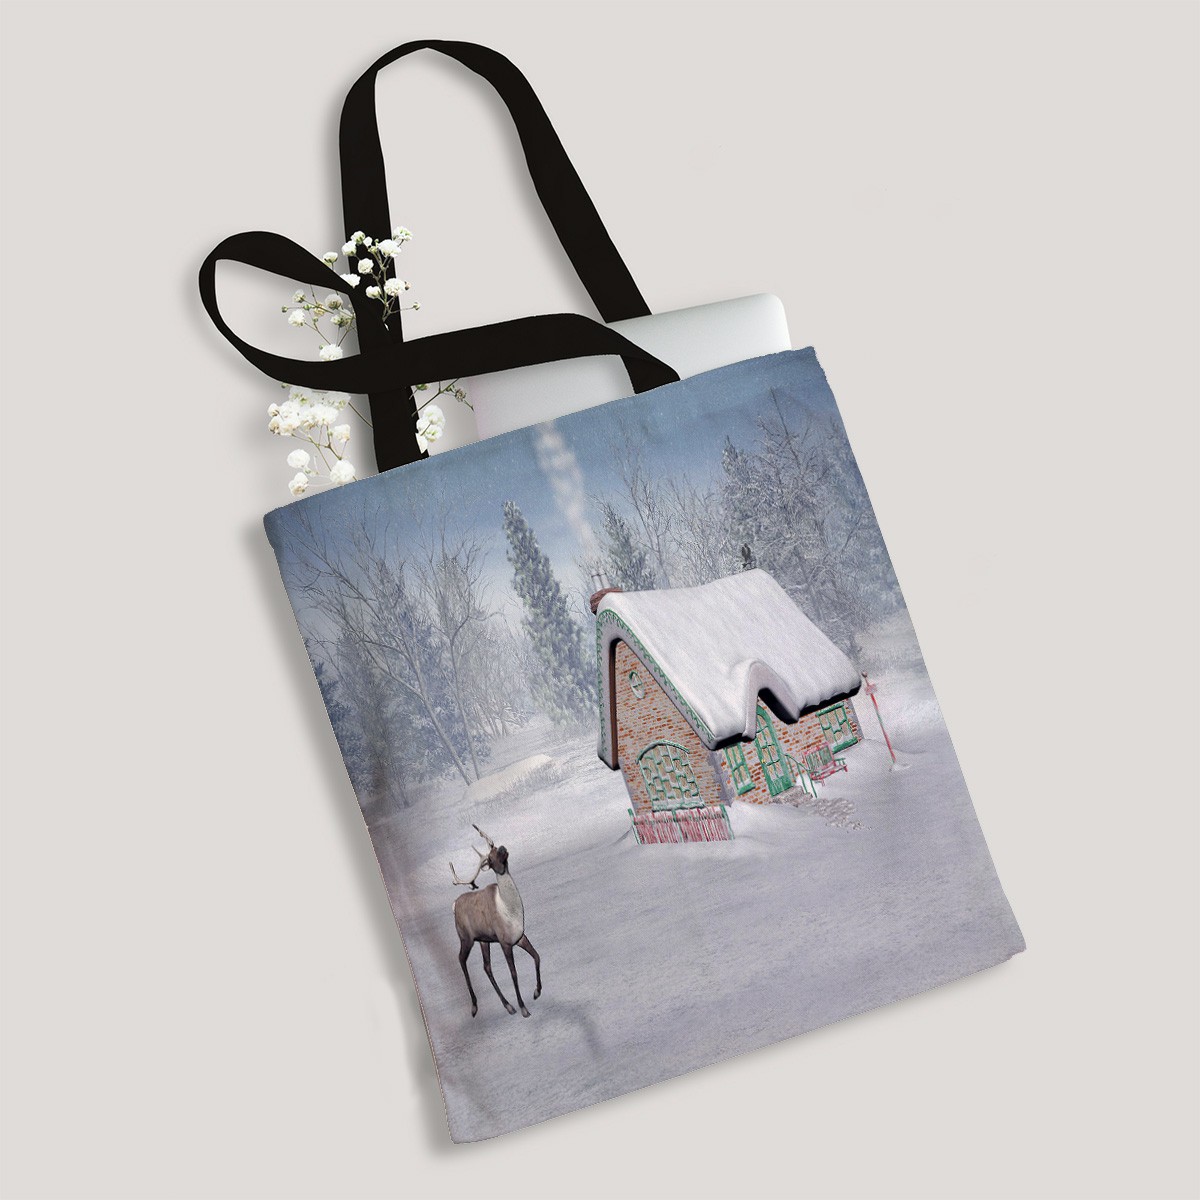 ECZJNT Winter Wonderland Christmas Canvas Bag Reusable Tote Grocery Shopping Bags Tote Bag 14"(W) x 16"(H) - image 2 of 2